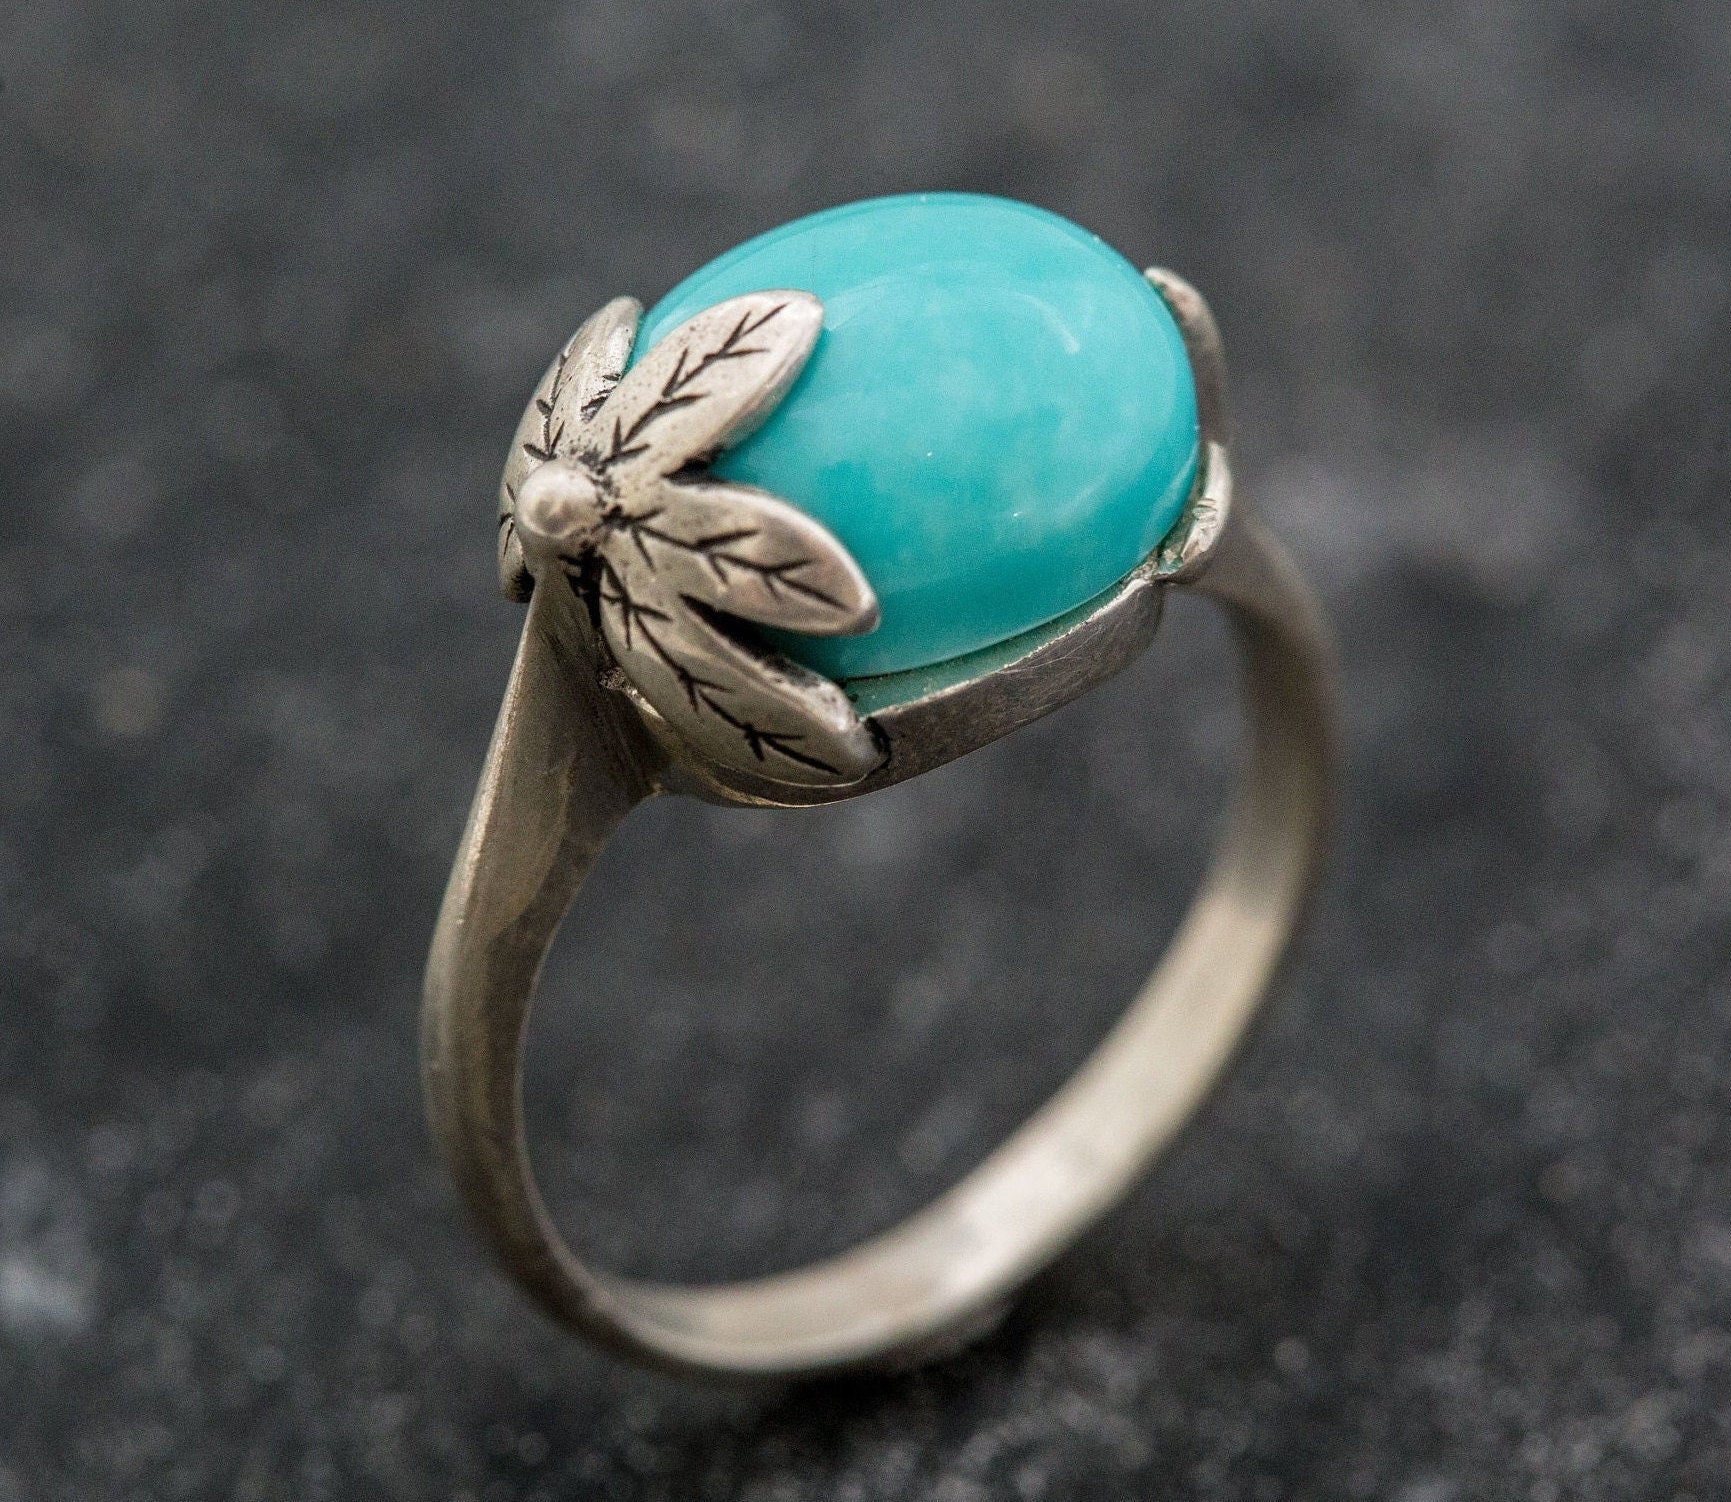 Leaf Ring, Turquoise Ring, Natural Turquoise, December Birthstone, Arizona Turquoise, Vintage Rings, Sleeping Beauty Turquoise, Solid Silver